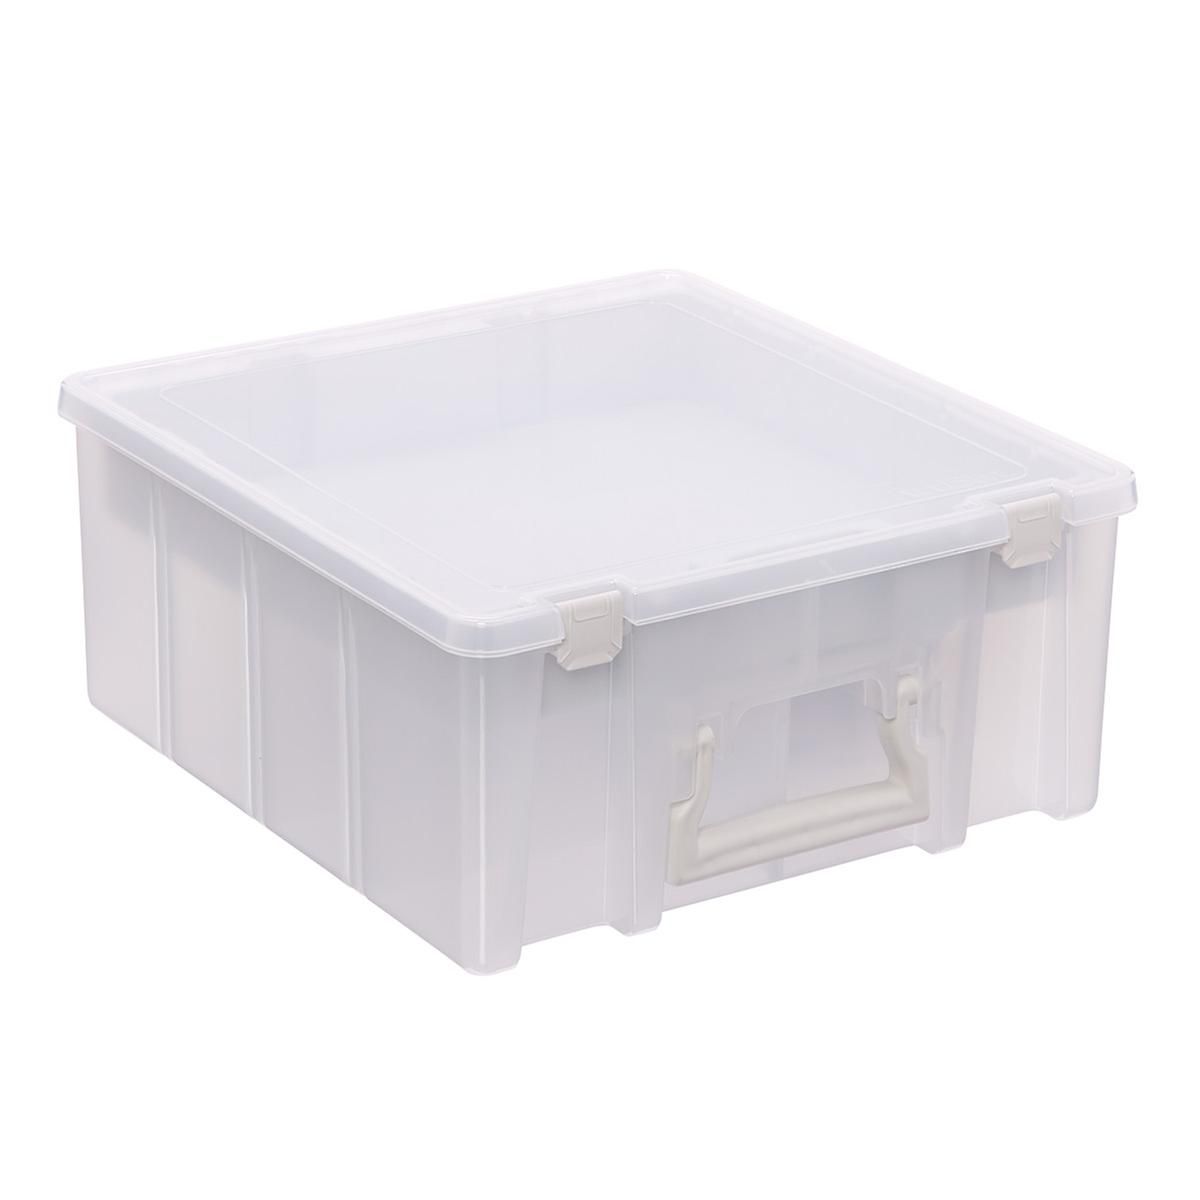 ArtBin Double Deep Super Satchel with Tray | The Container Store